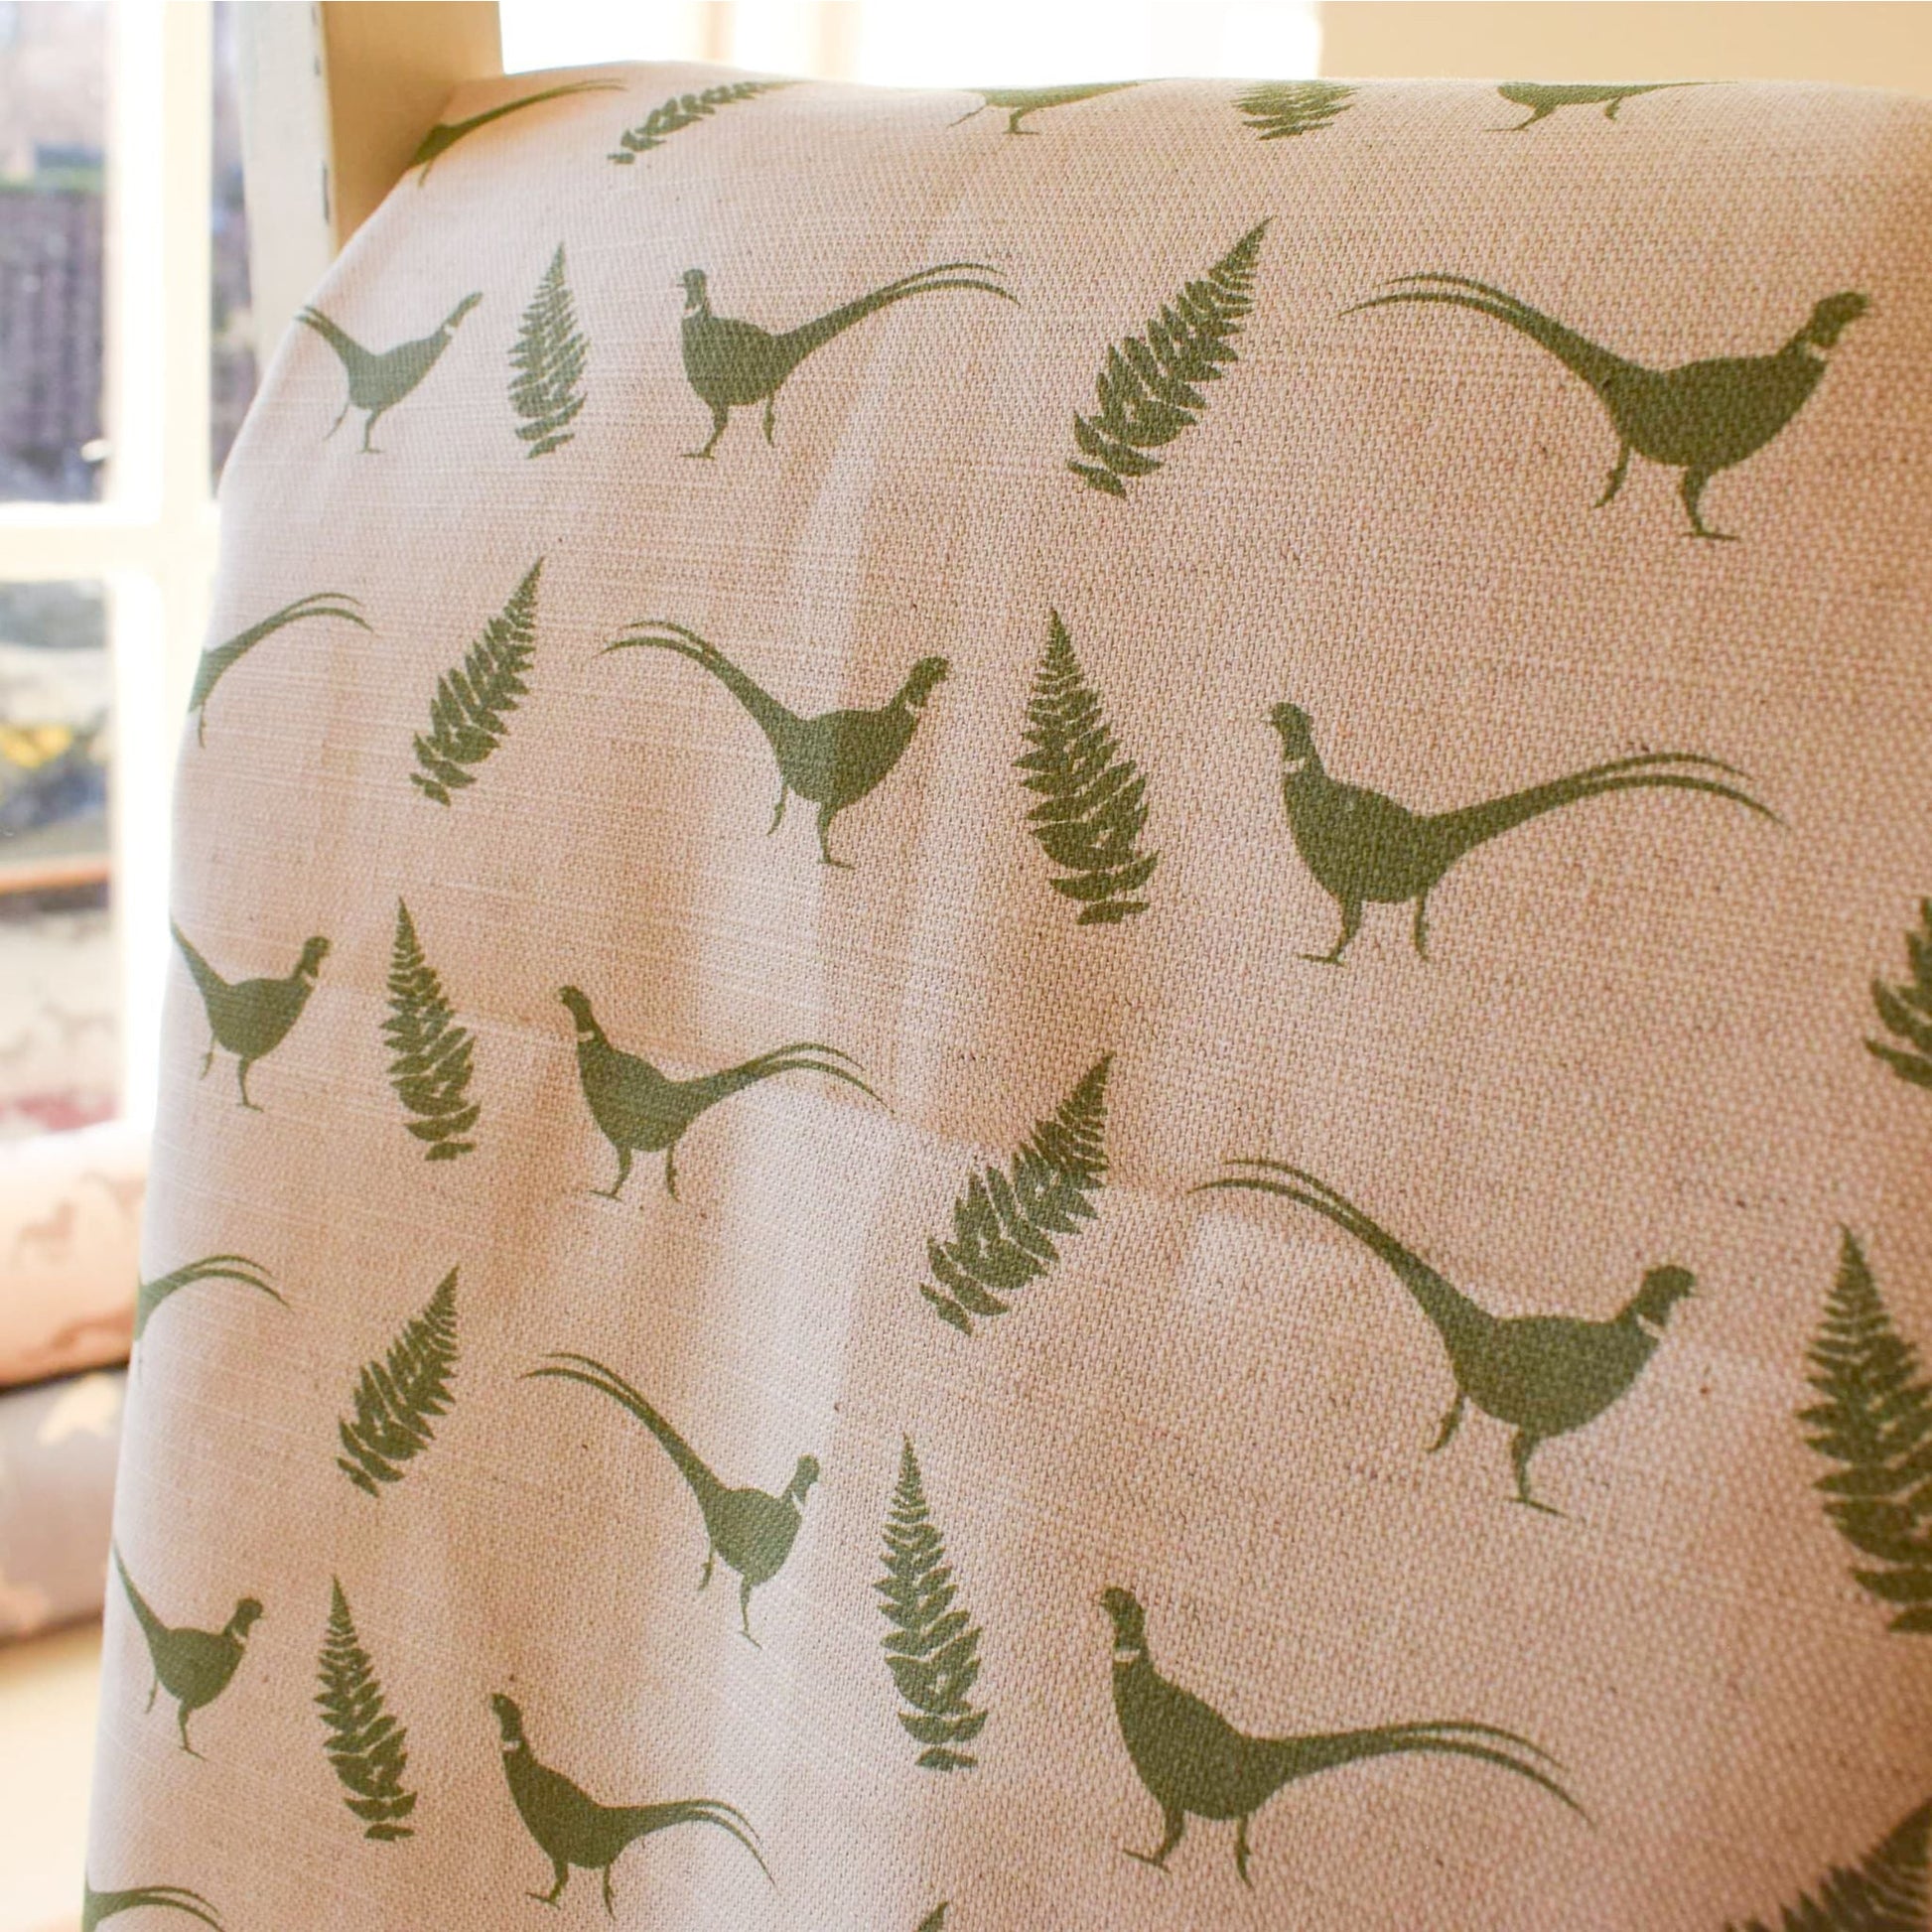 Pheasant Print Fabric - Featuring Cock Pheasants and Fern Leaves - Designed by F&B and inspired by Yorkshire